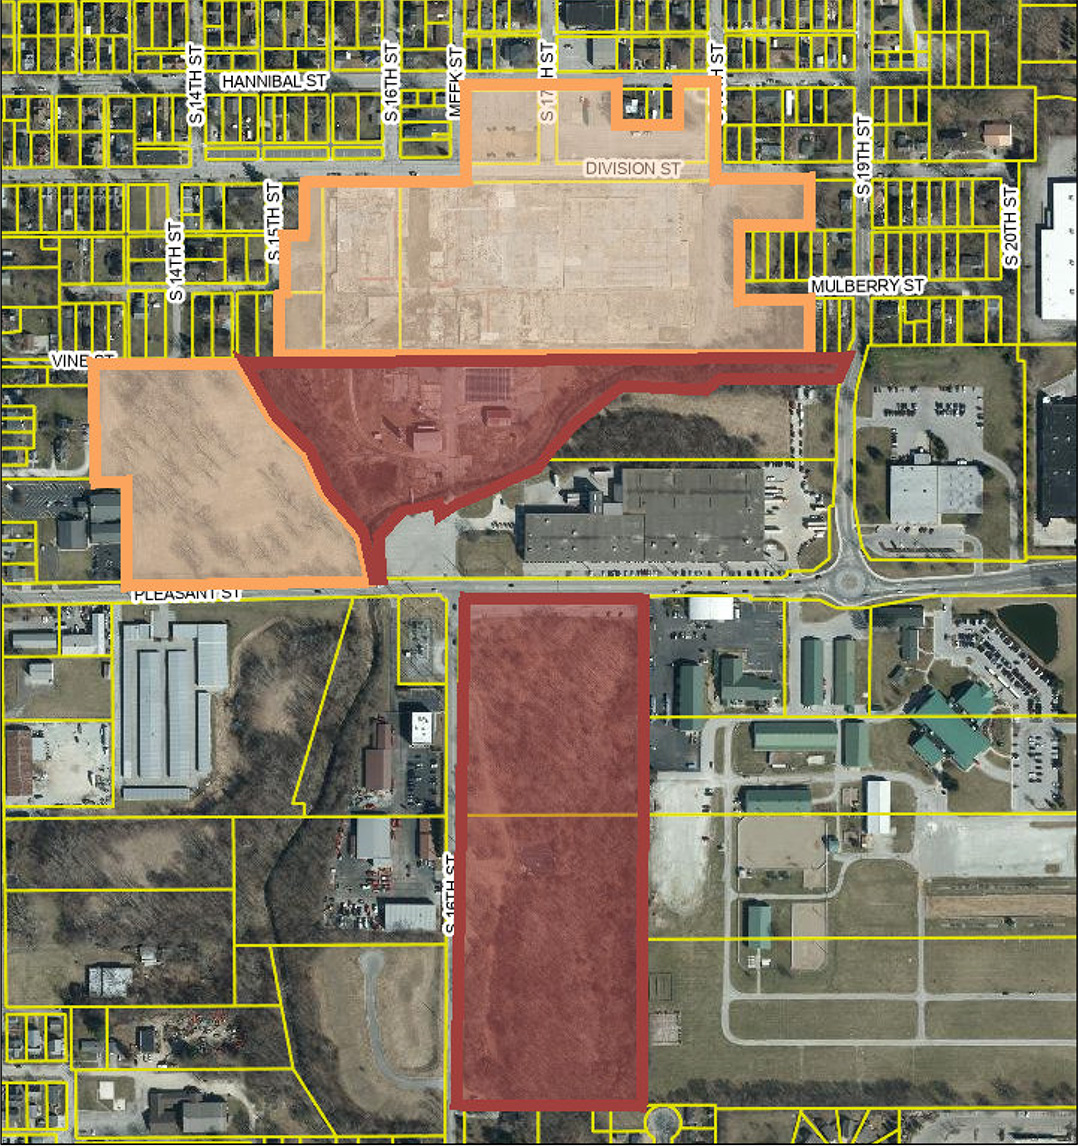 Noblesville ponders development options for recently acquired land